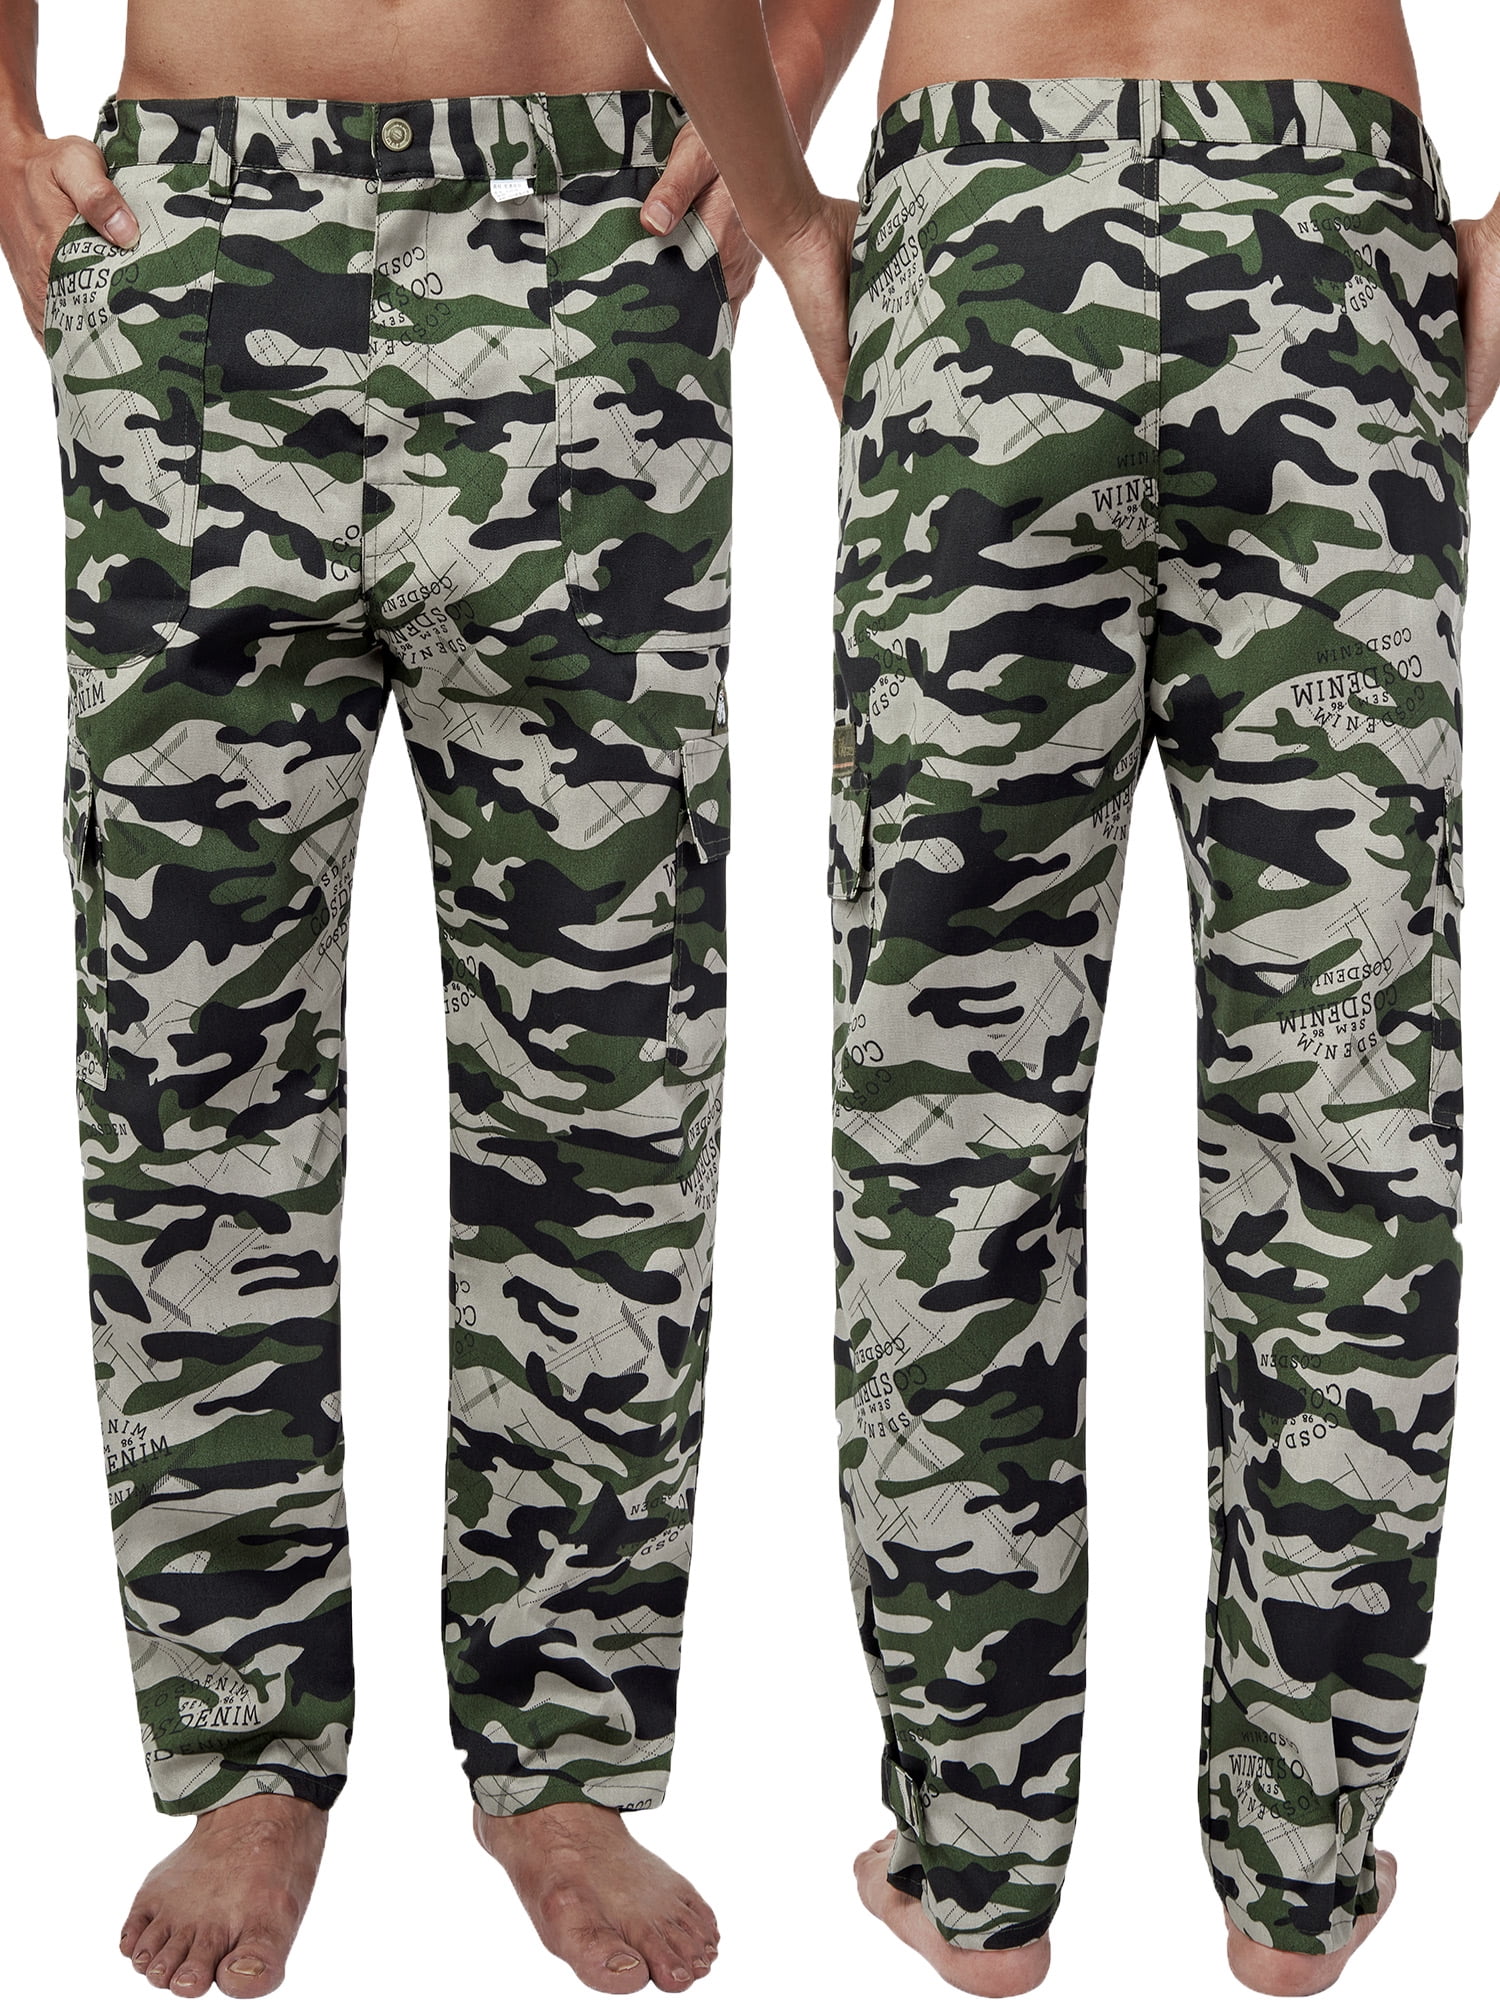 Camping Hiking Army Cargo Combat Military Men's Trousers Camouflage Casual Pants 